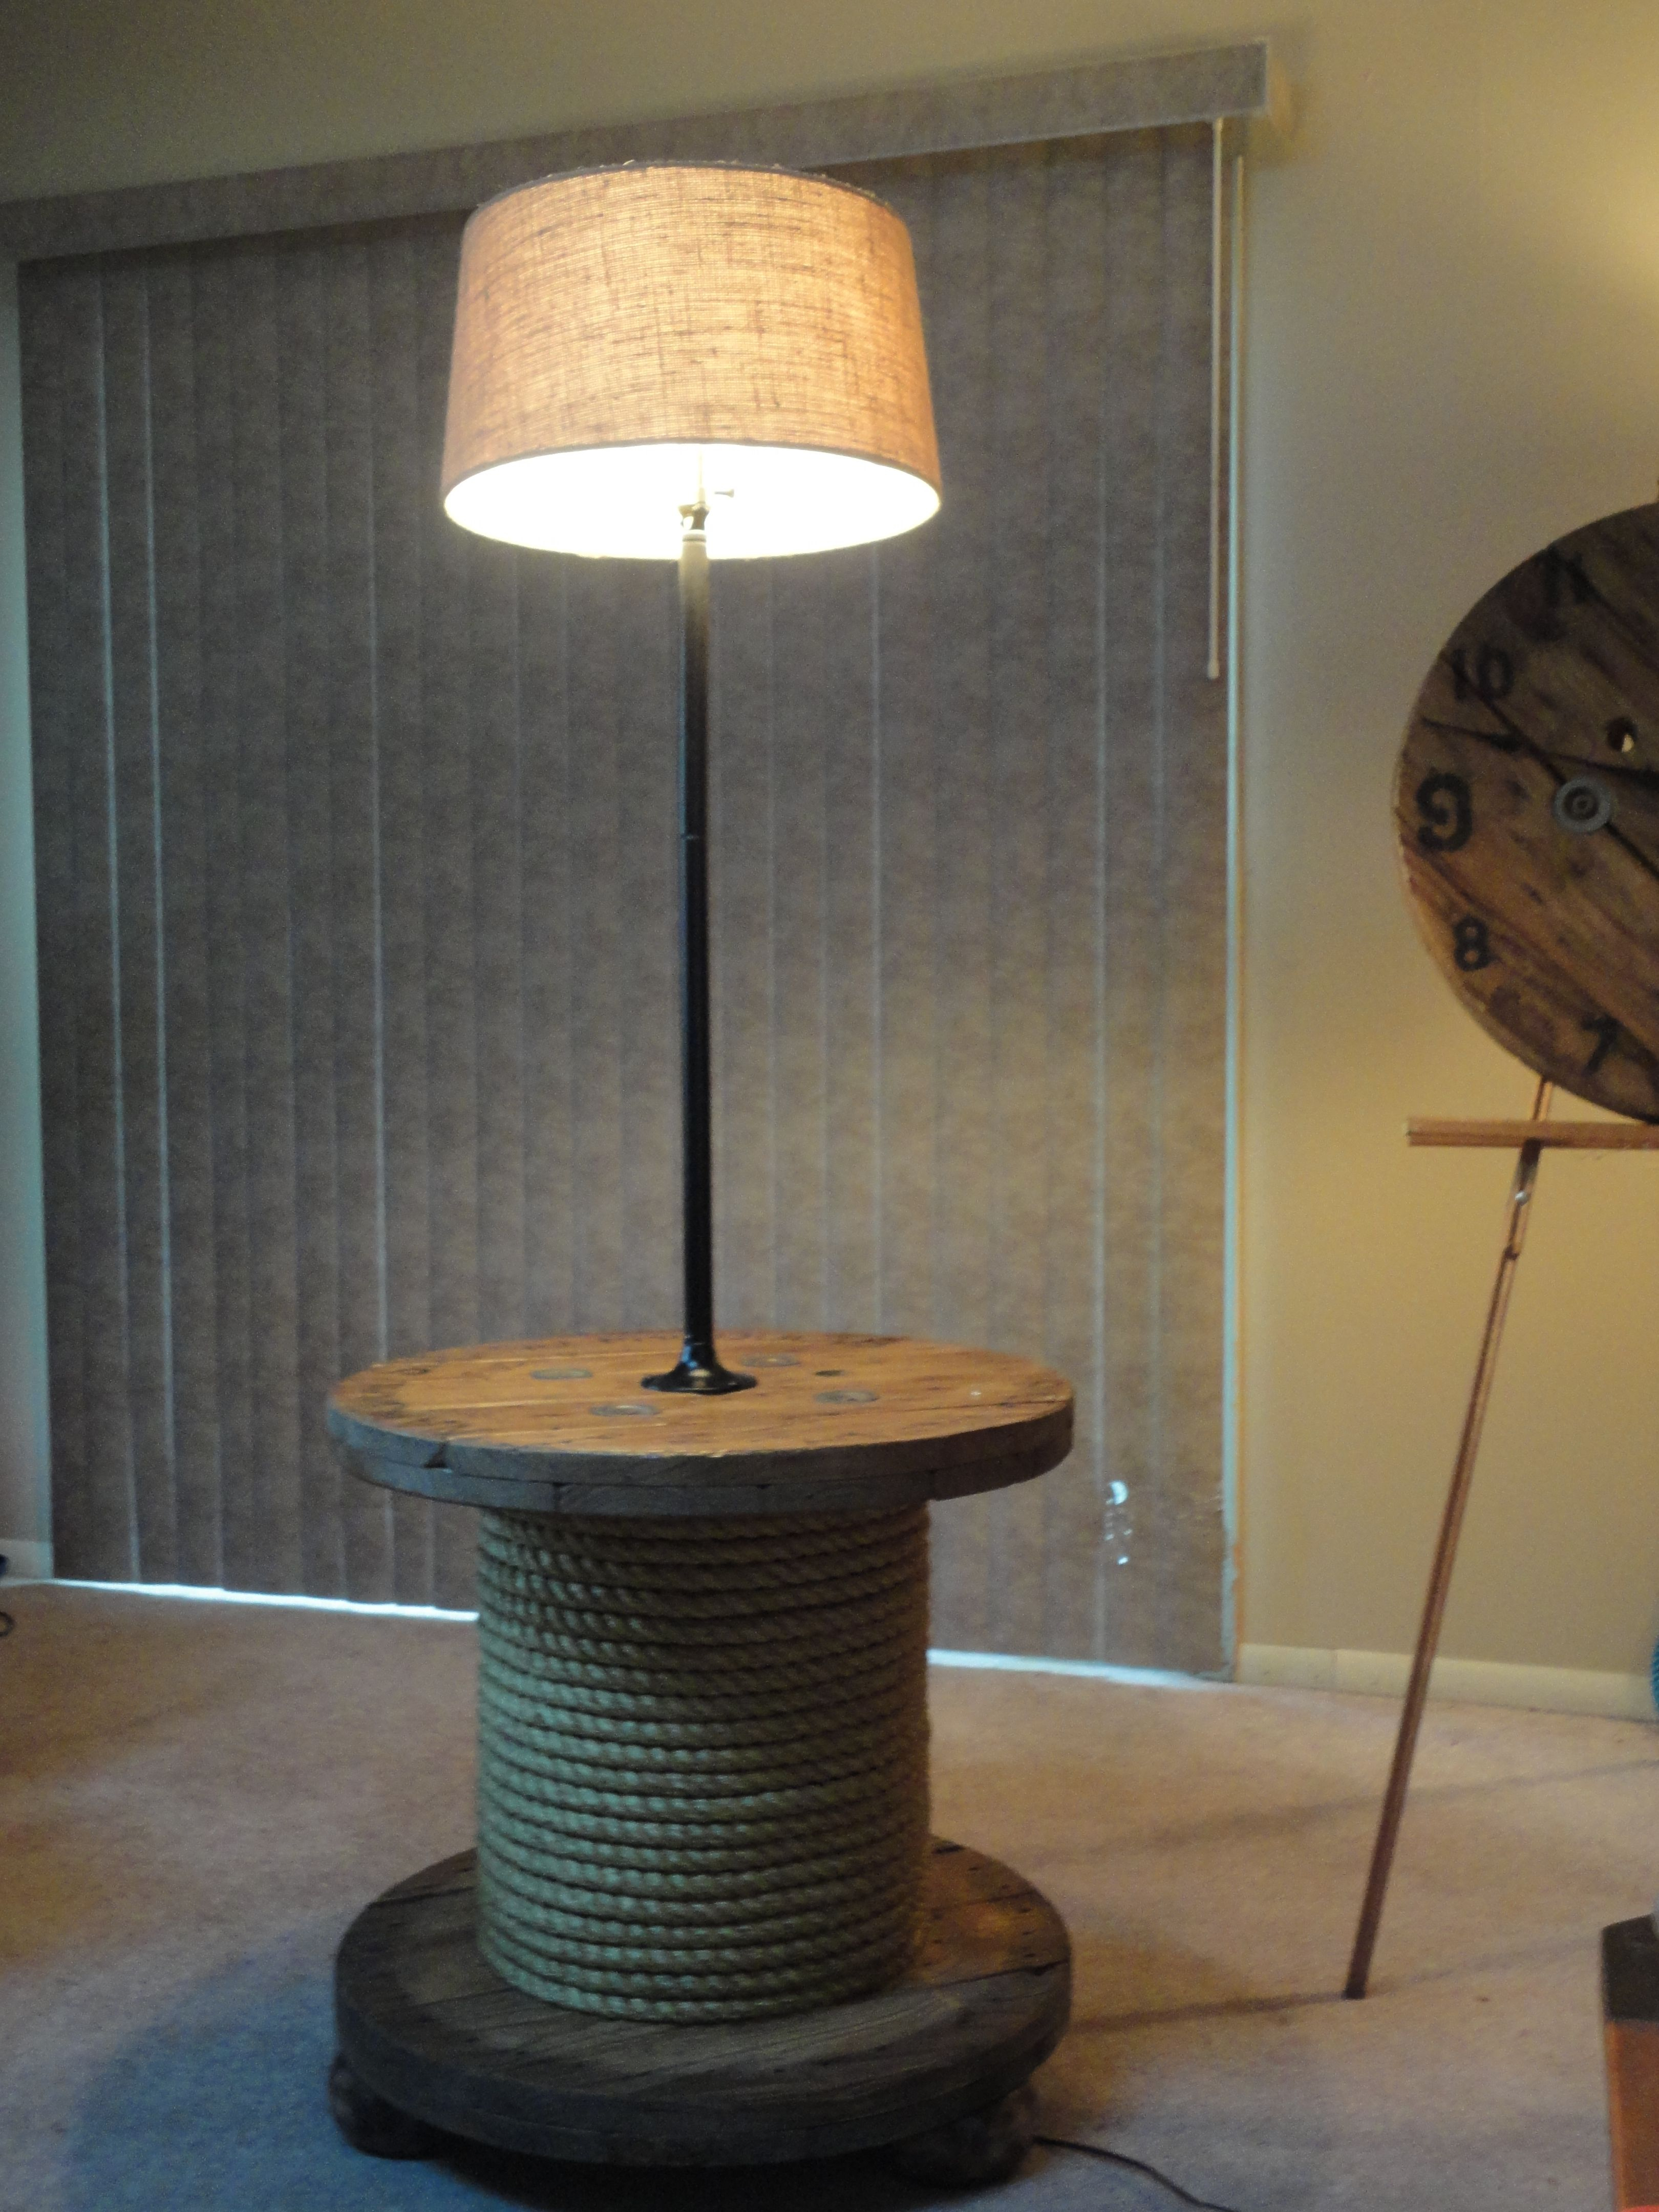 My Dad Made This Spool Table Lamp He Is So Creative inside sizing 3240 X 4320